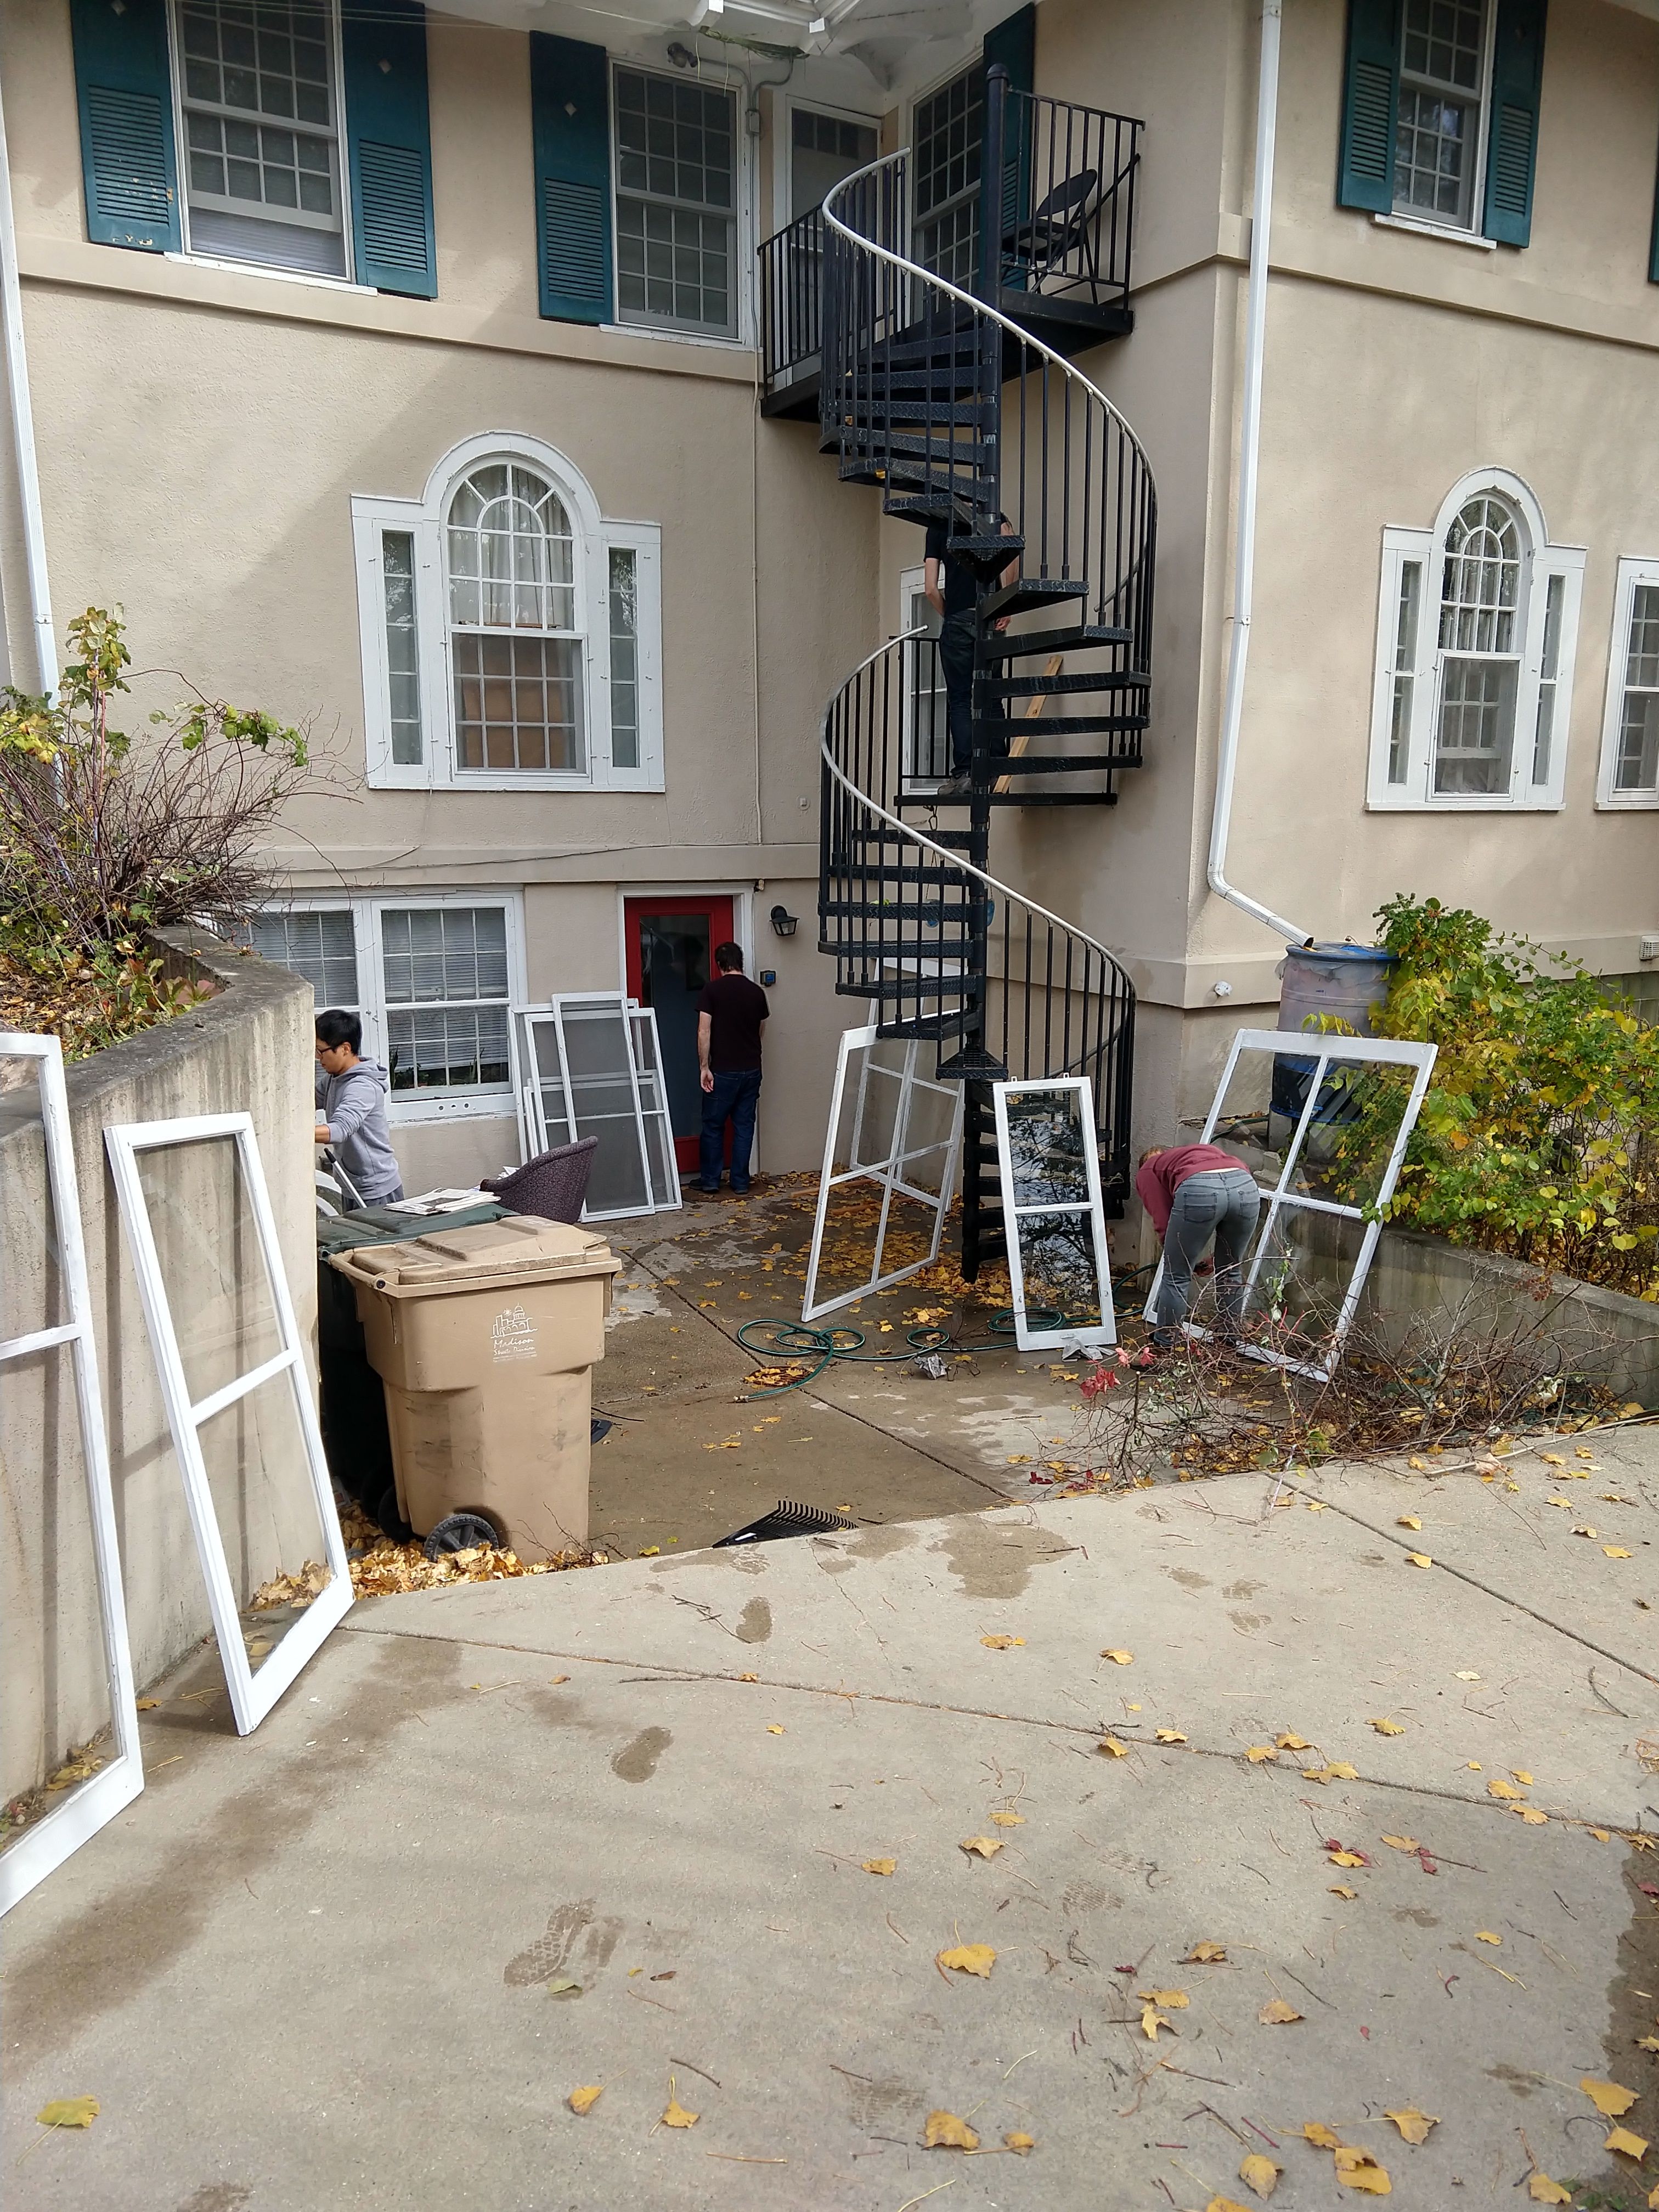 House storm windows being prepared for installation on Work Weekend. The windows have been cleaned and are leaning against the house. (Circa fall 2020)